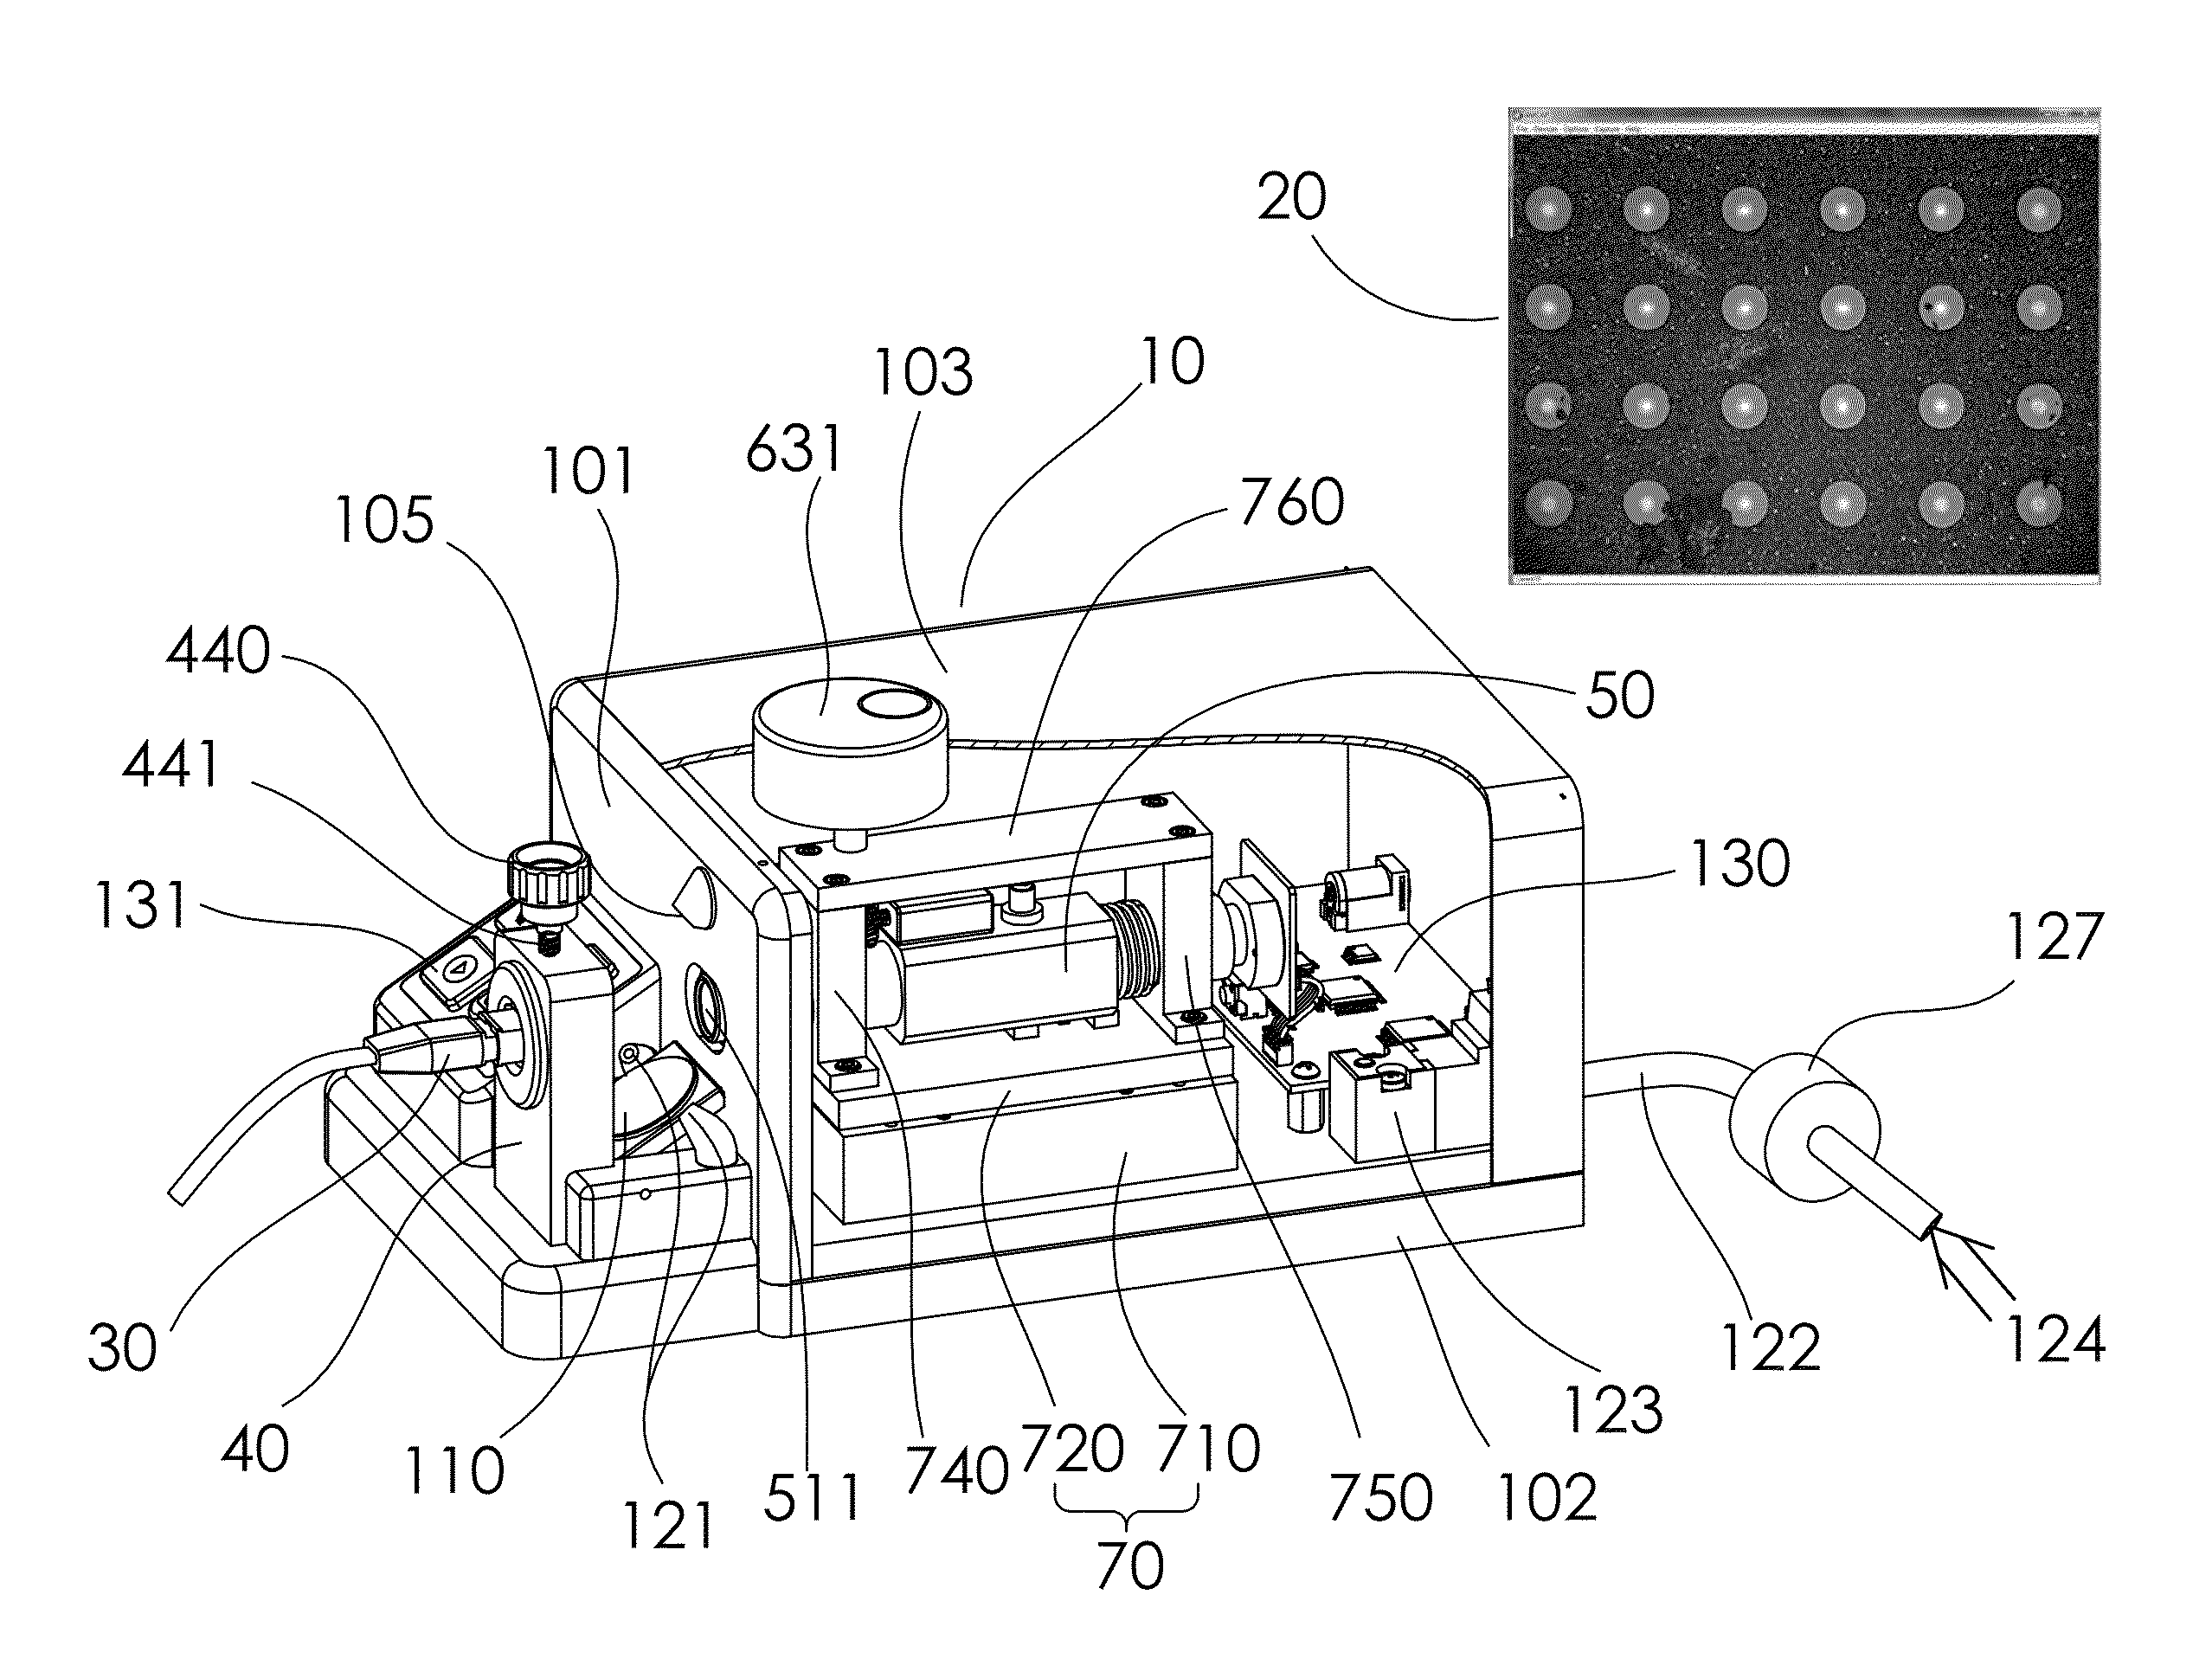 Apparatus for simultaneously inspecting and cleaning fiber connector